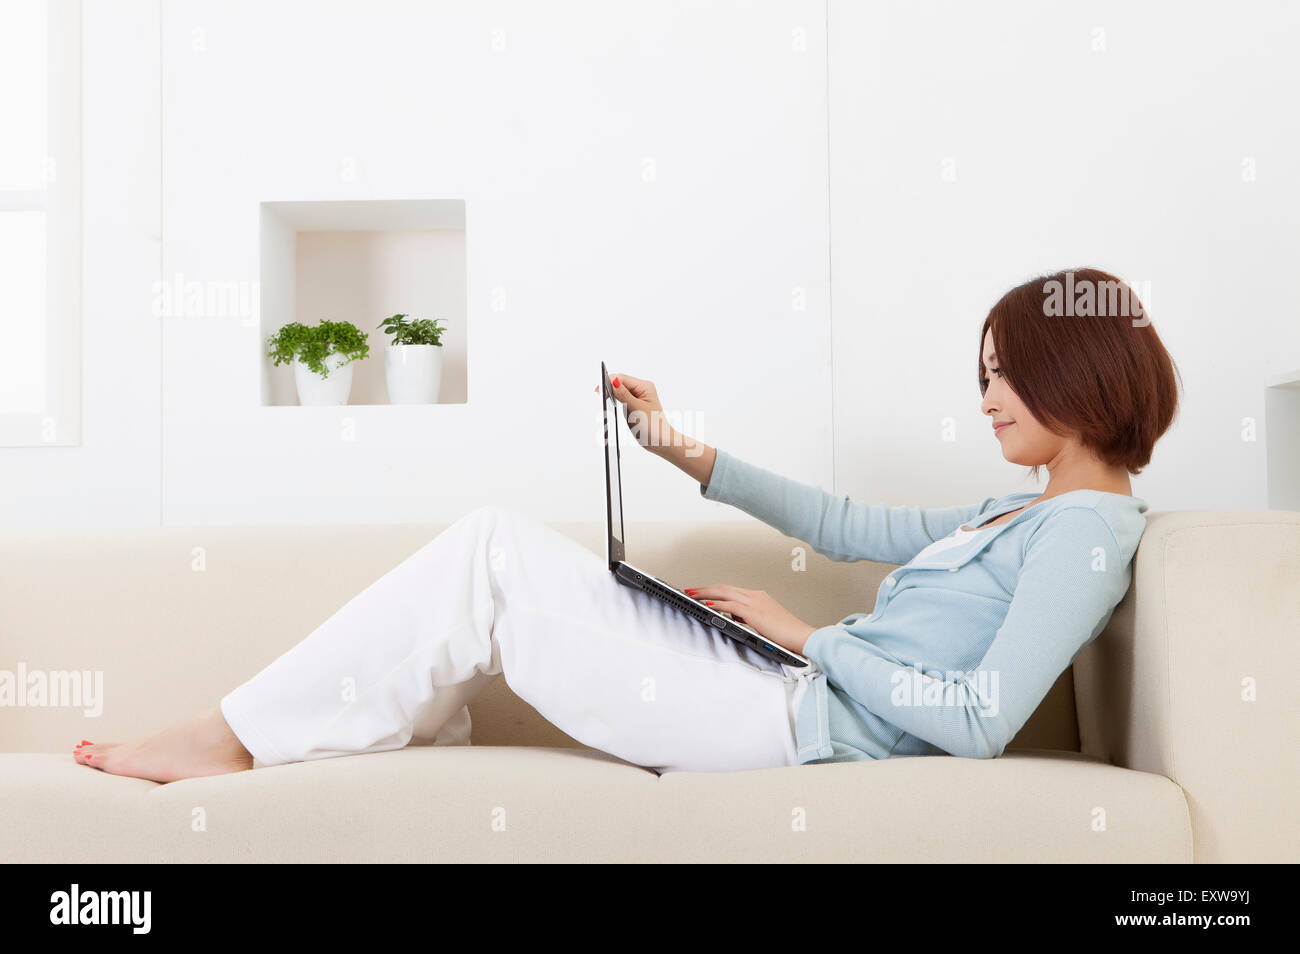 Young woman sitting on sofa and using laptop, Stock Photo